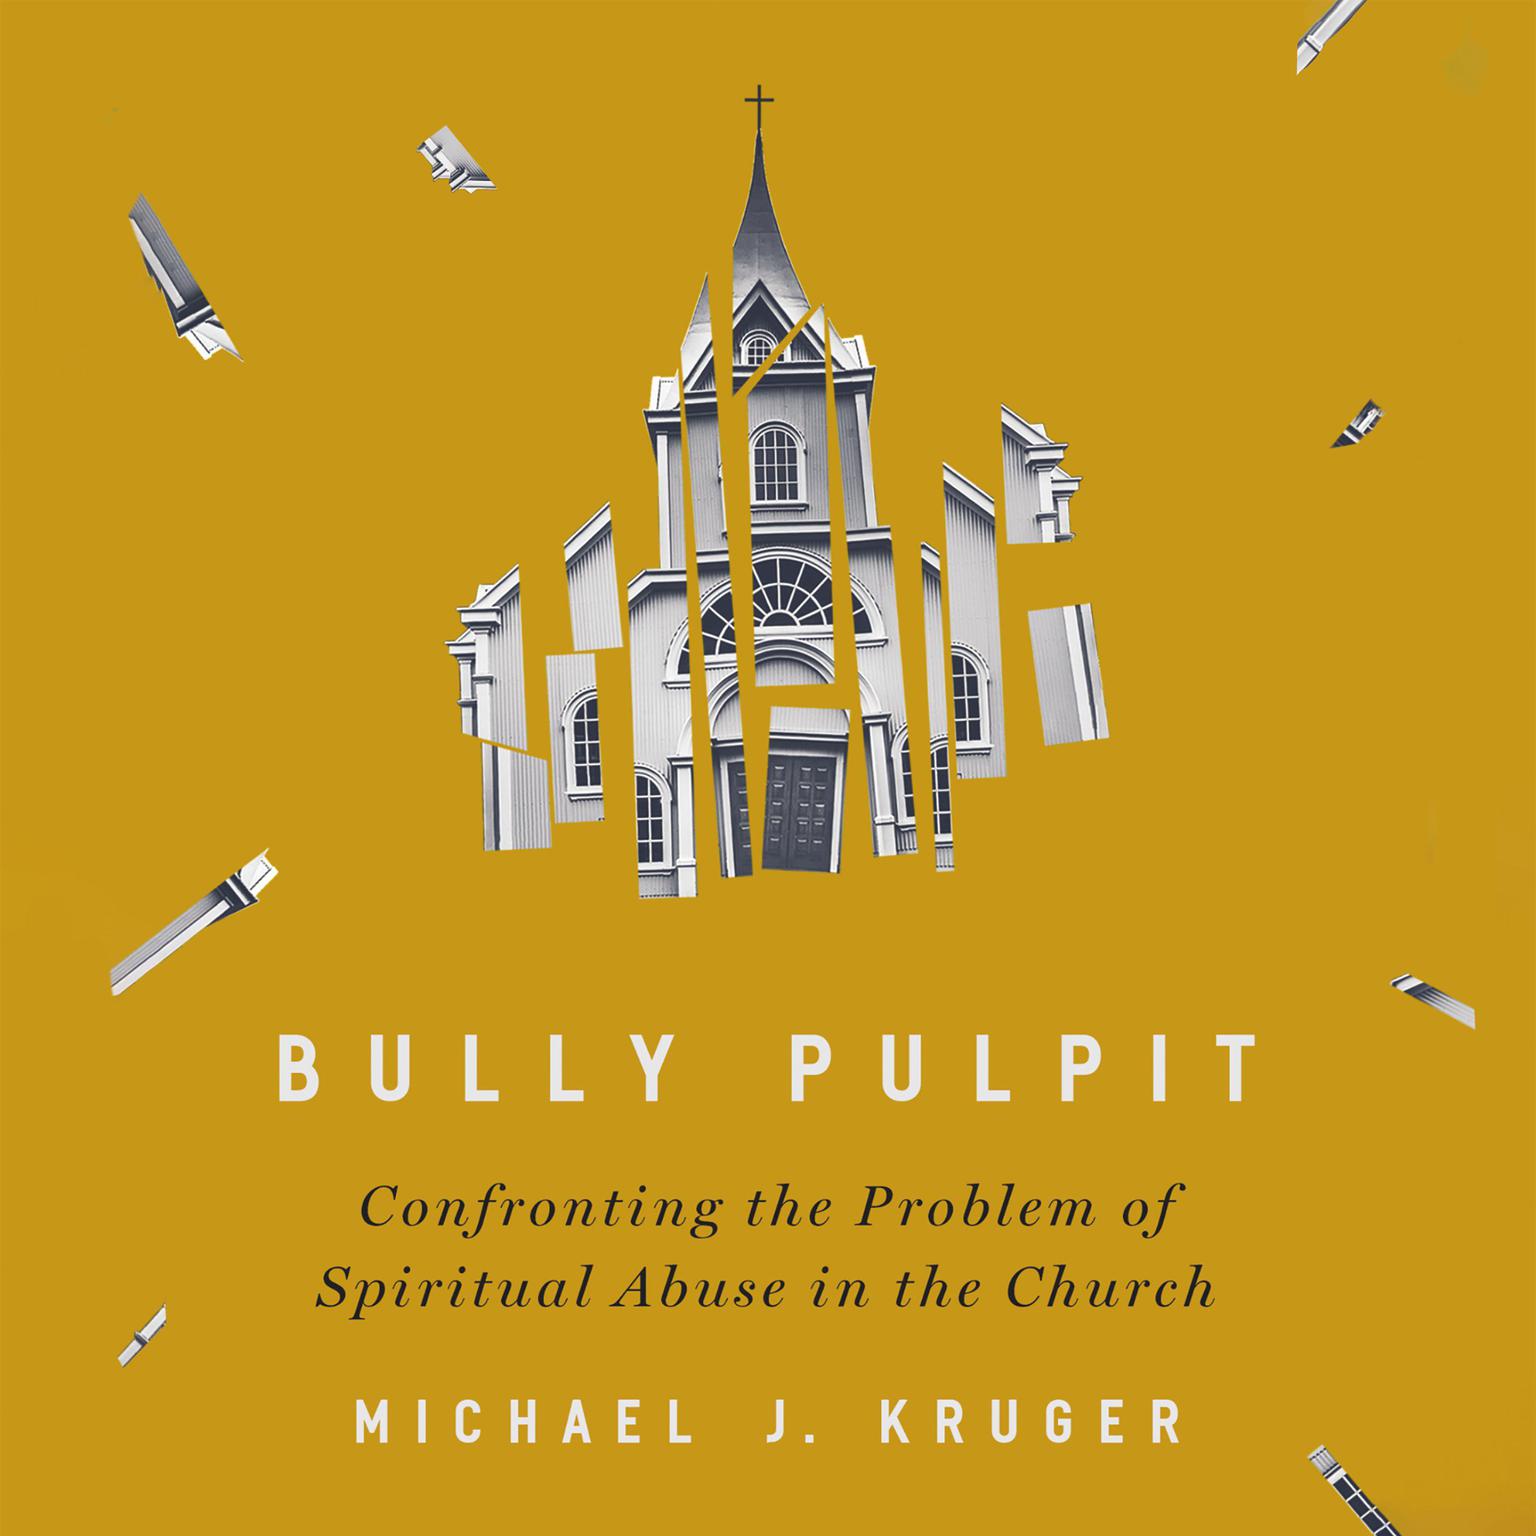 Bully Pulpit: Confronting the Problem of Spiritual Abuse in the Church Audiobook, by Michael J. Kruger